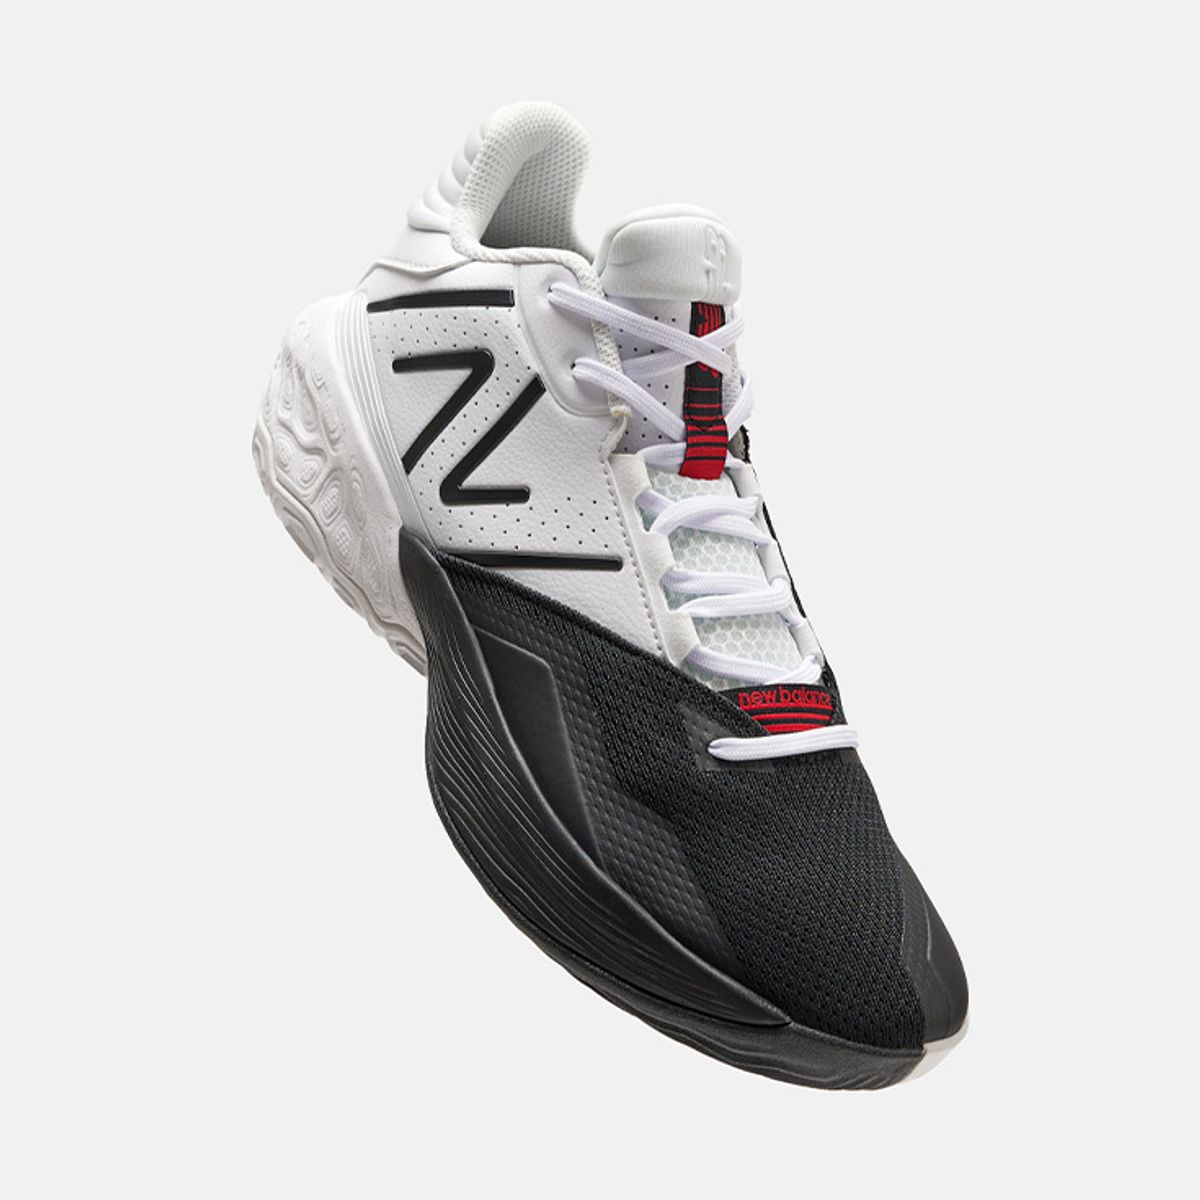 Jamal Murray and Dejounte Murray unveil New Balance's newest basketball  shoes